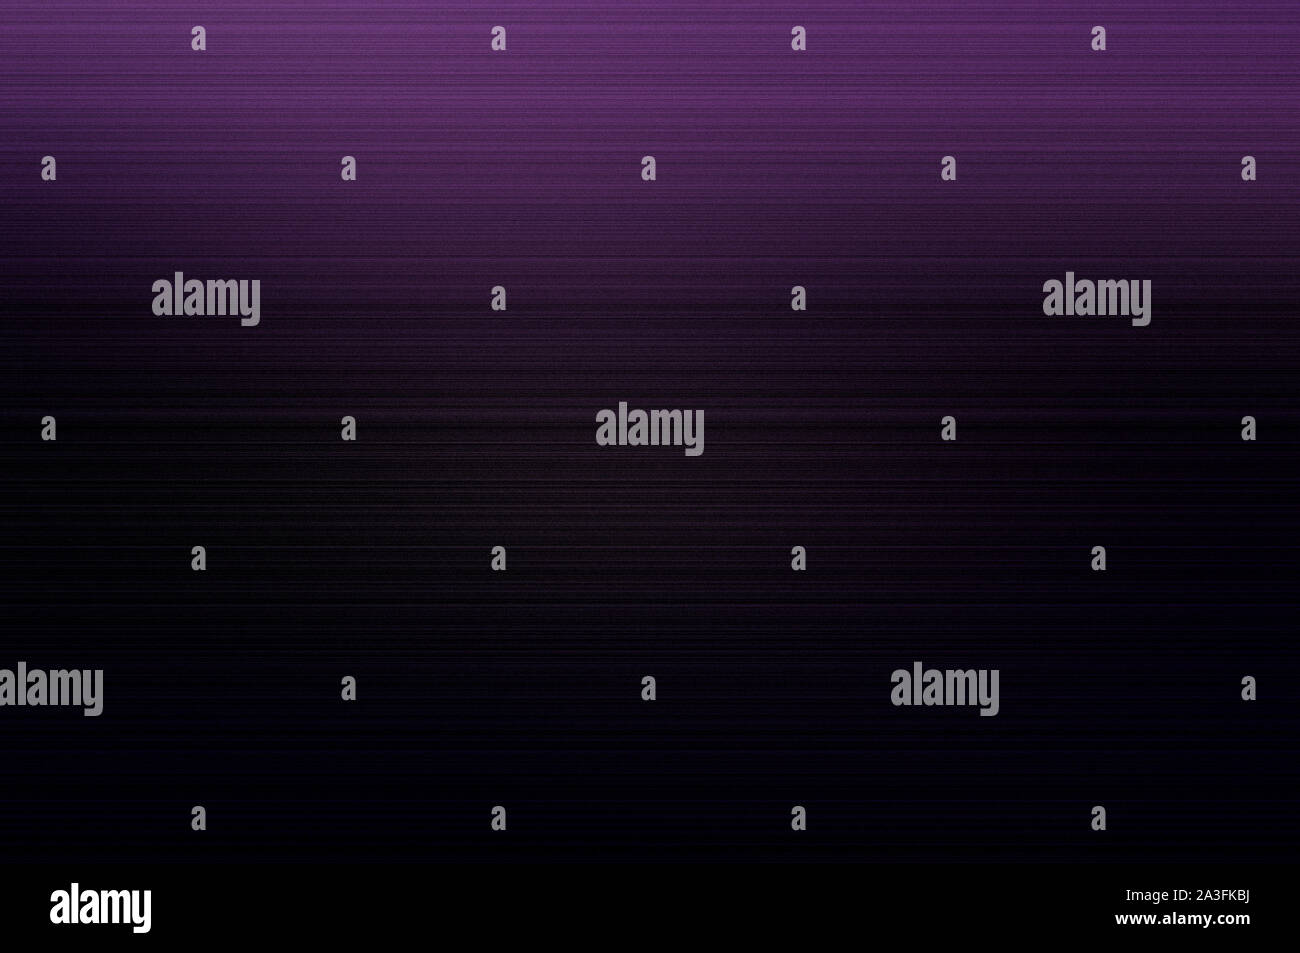 Abstract Ombre Background Banner Dark Purple To Black